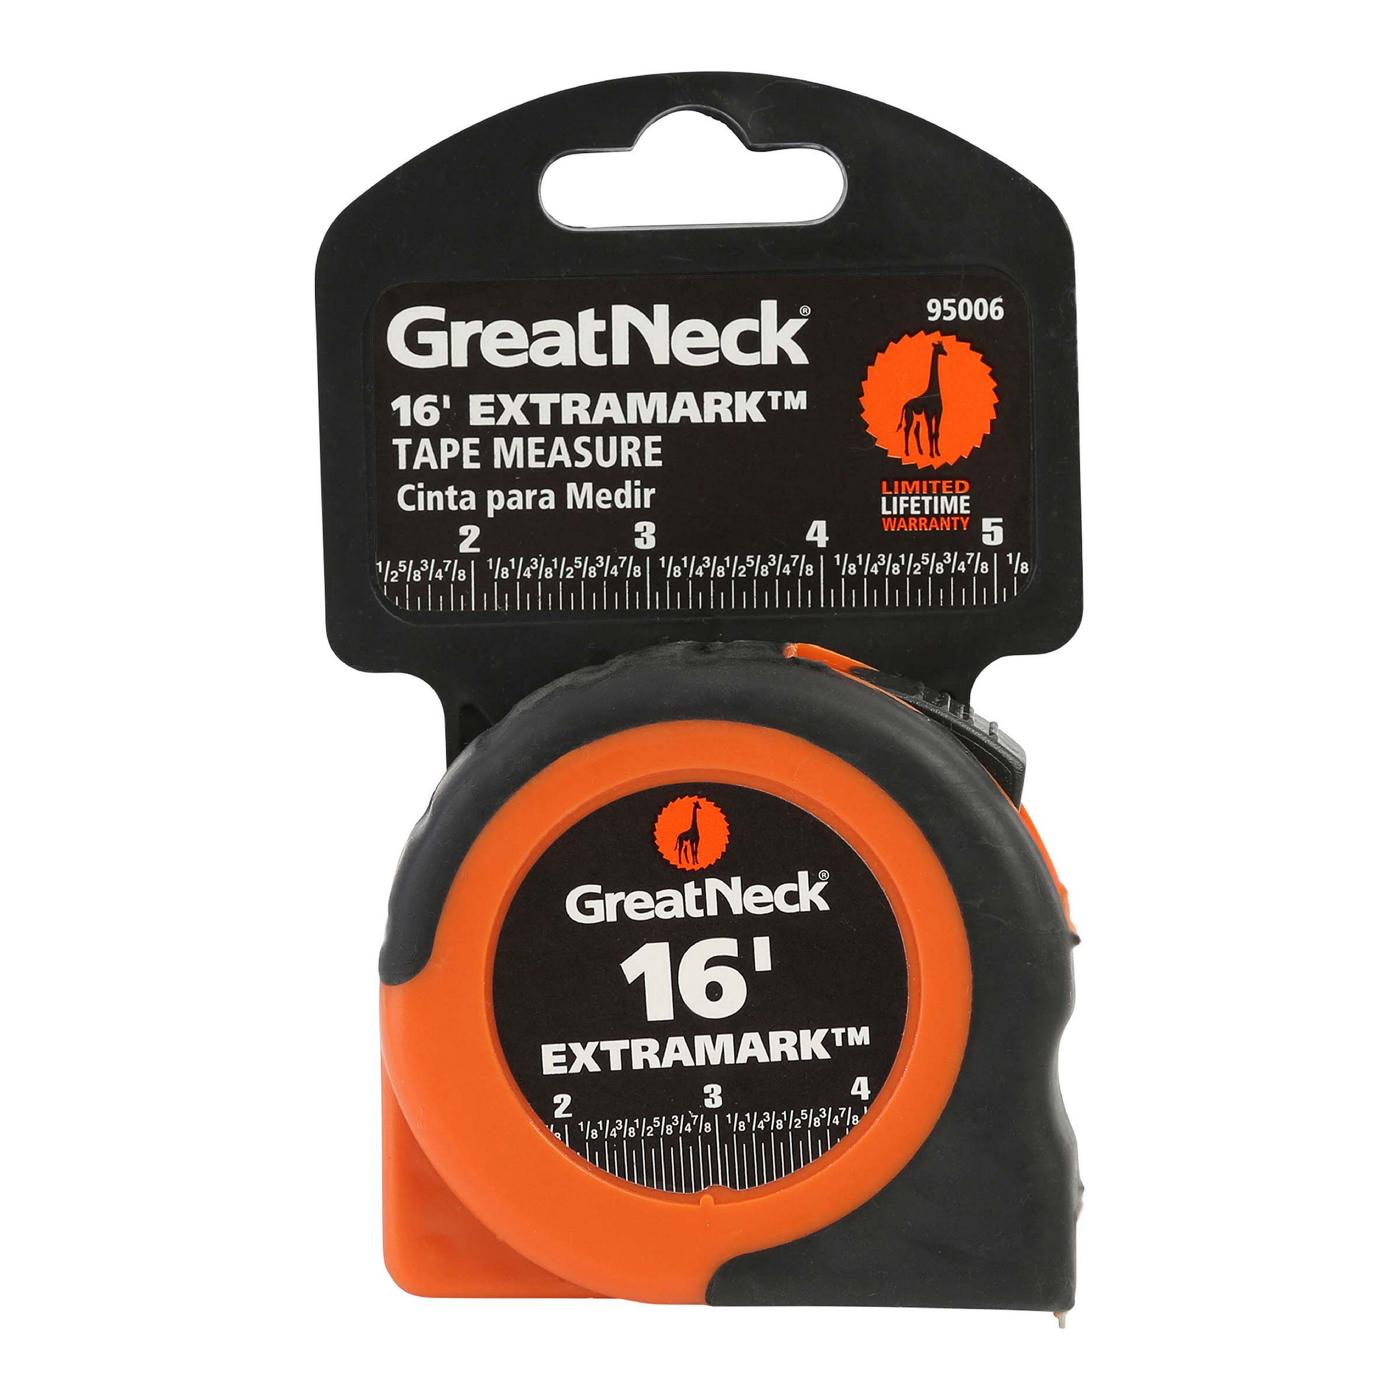 Great Neck ExtraMark™ Rubber Grip Tape Measure; image 1 of 9